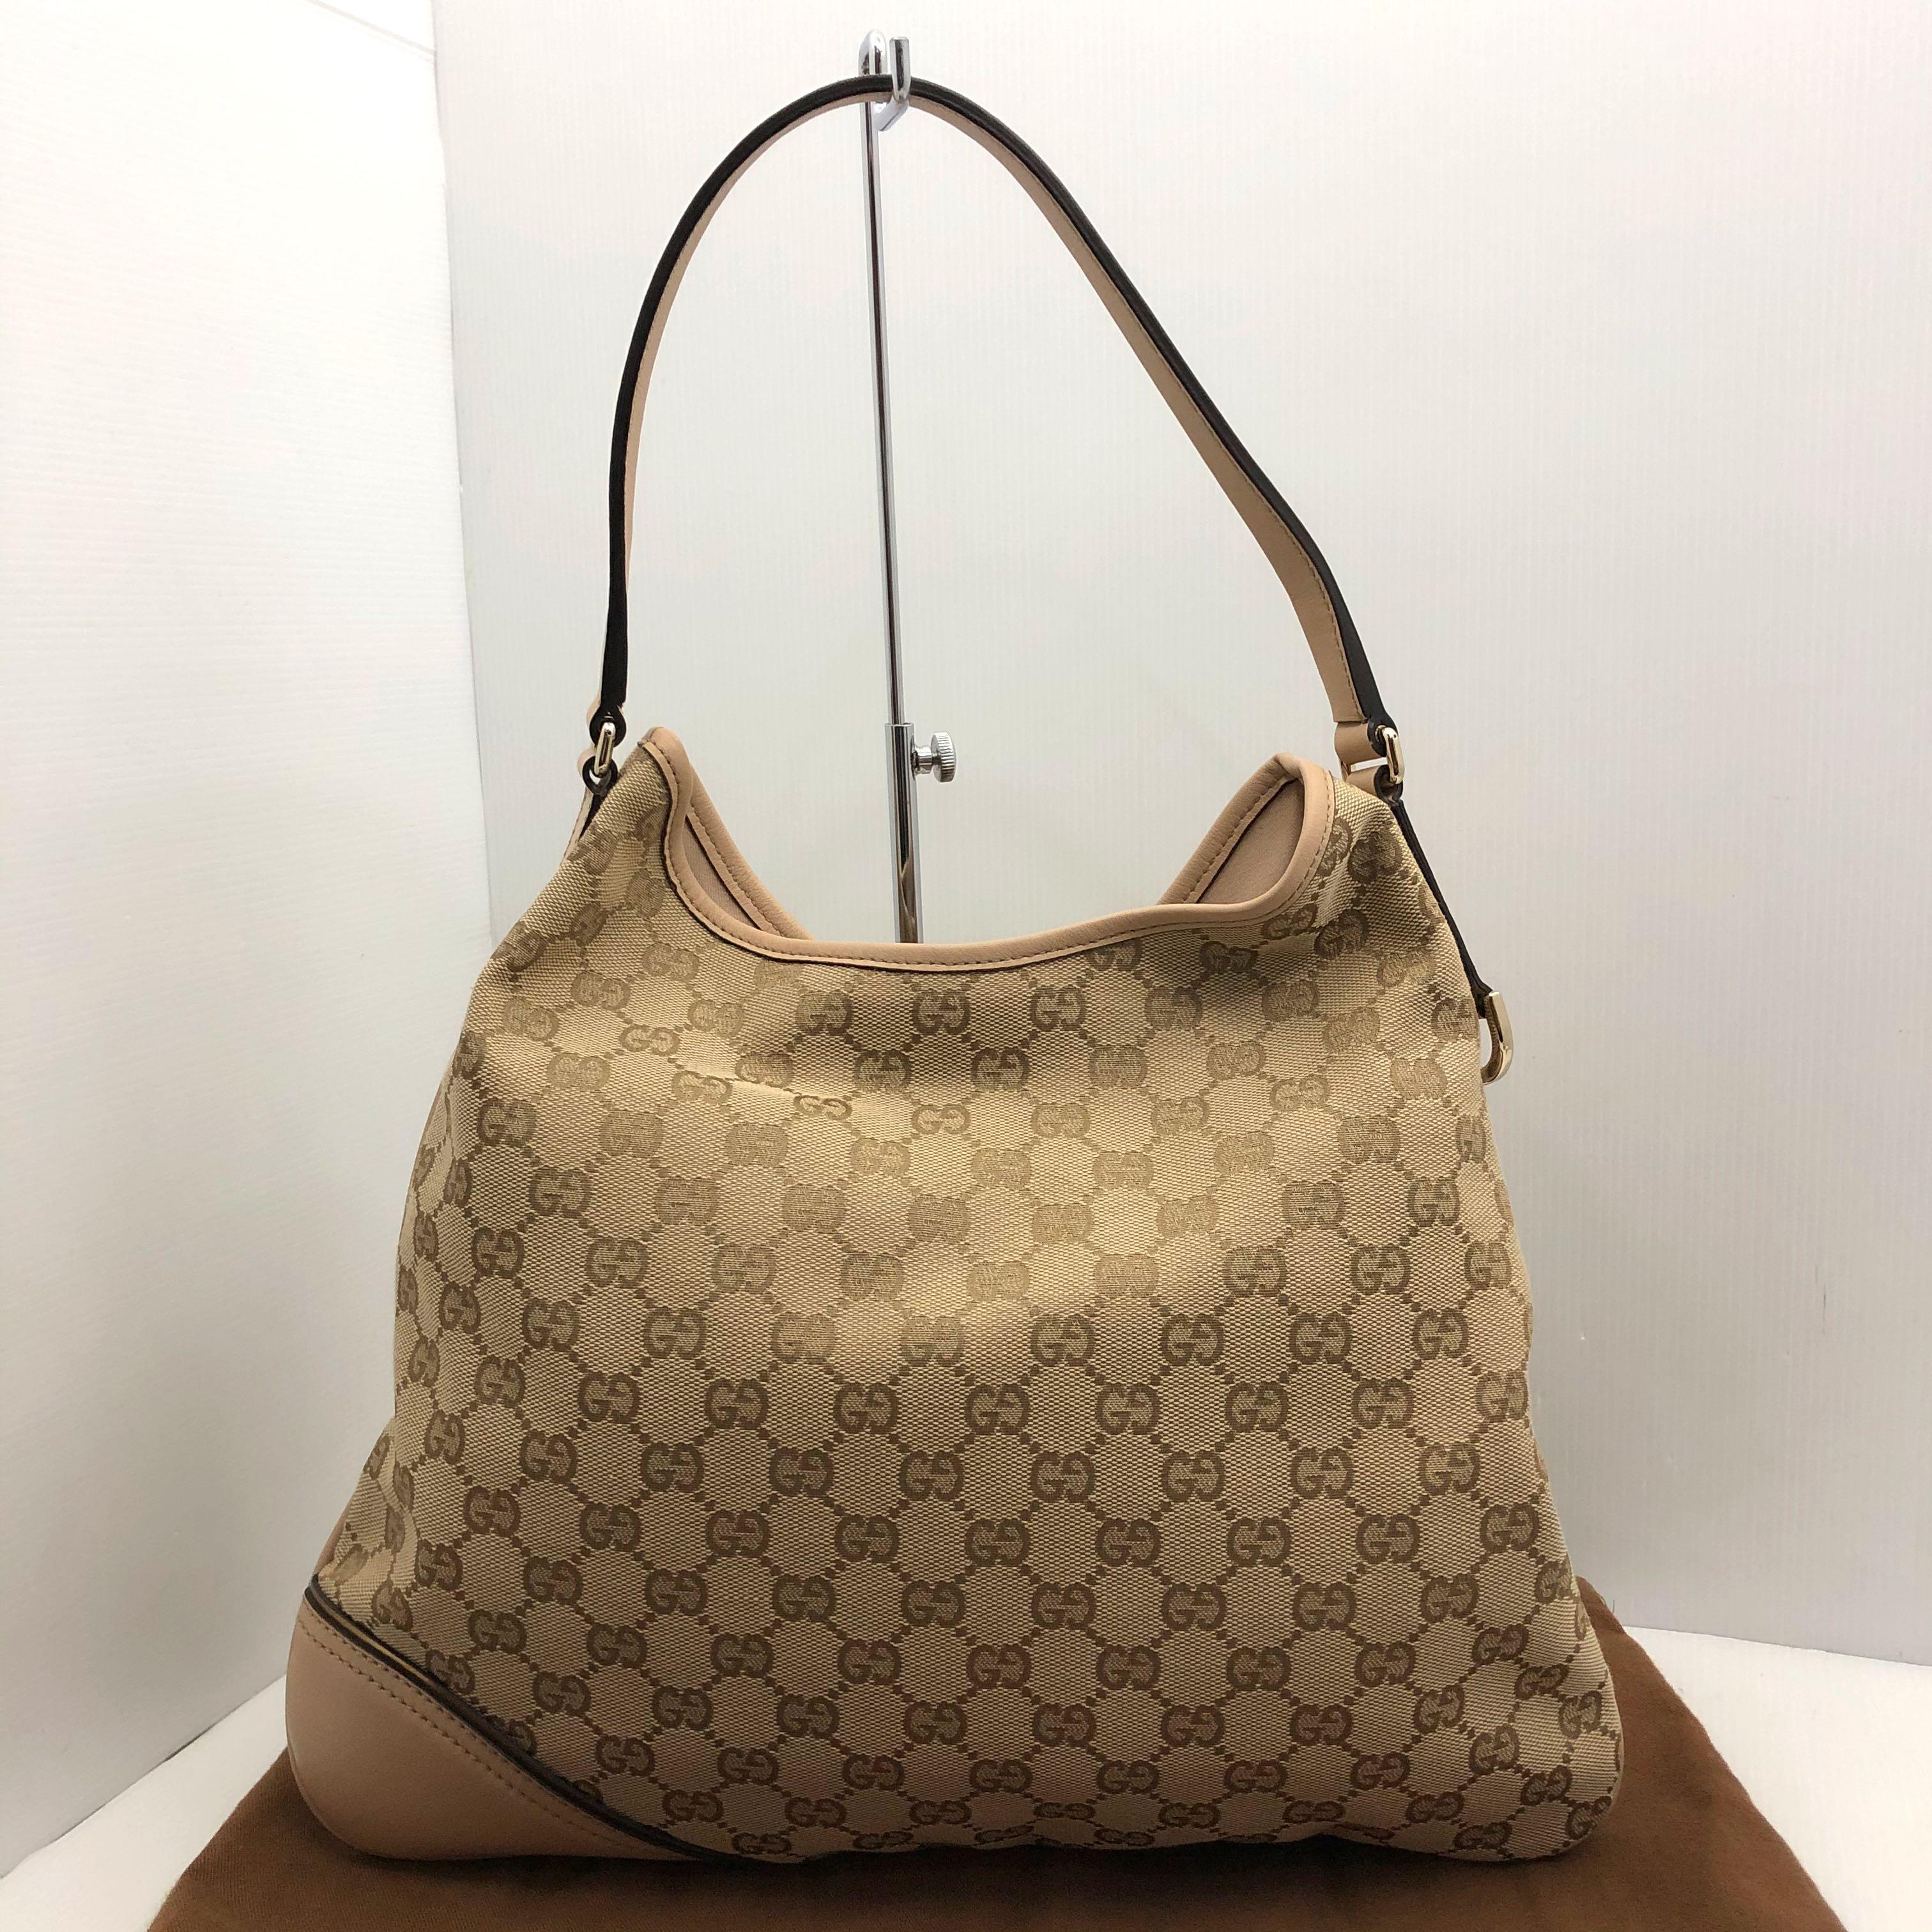 Auth GUCCI Interlocking Shoulder Bag Beige GG Canvas Leather 169947 Used